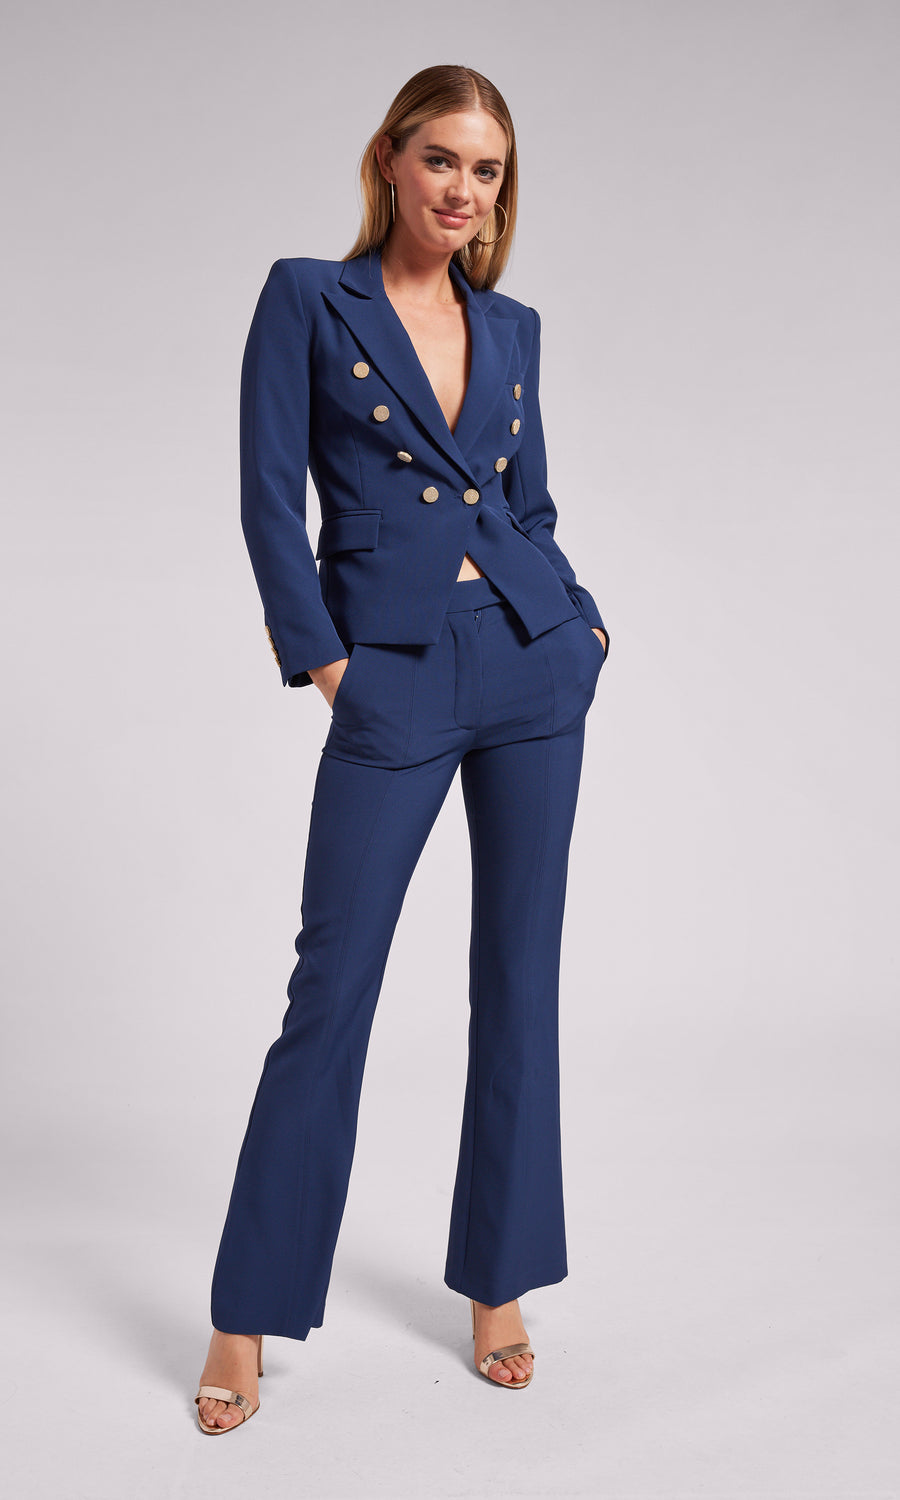 Royal Blue Formal Pants Suit With Single Breasted Blazer and Straight Pants  High Waist, Blue Blazer Trouser Suit for Women -  Norway